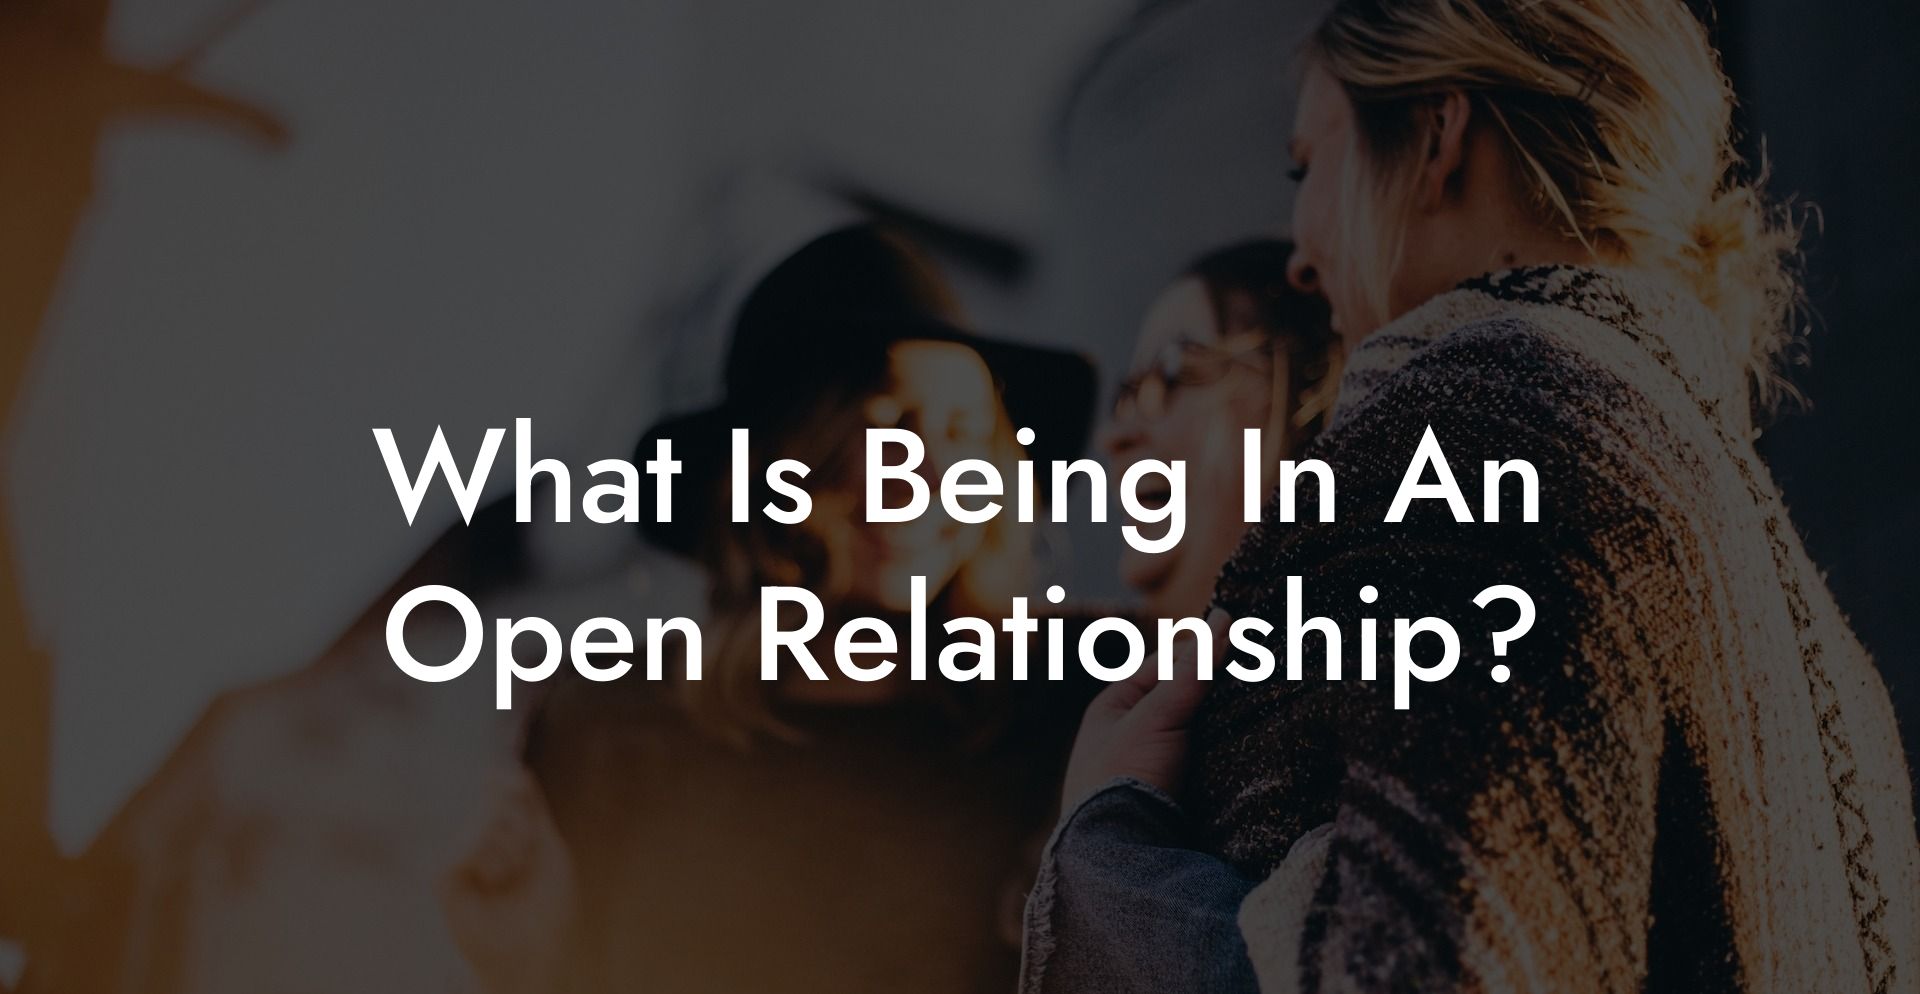 What Is Being In An Open Relationship?